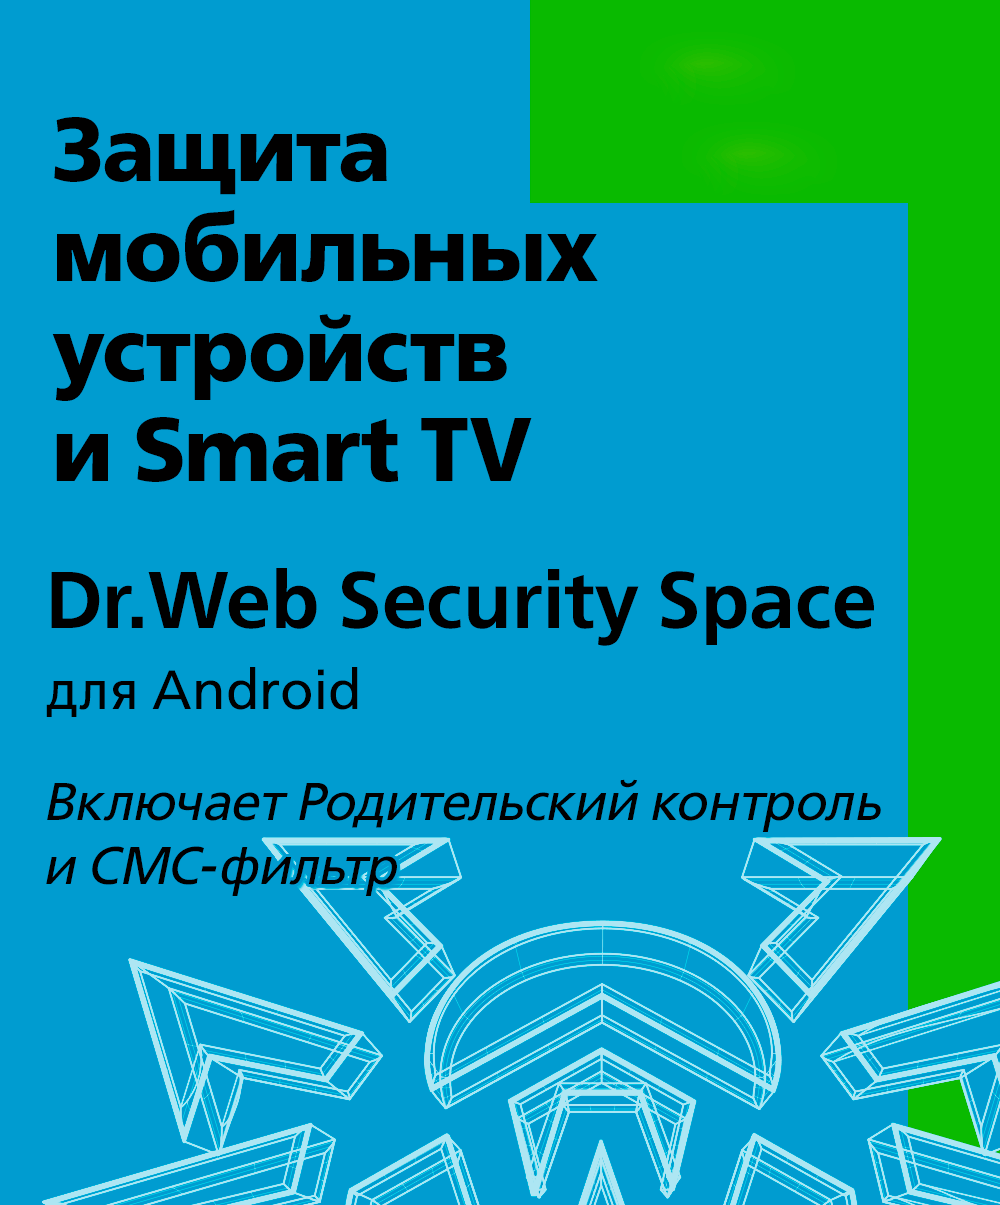 Dr.Web Security Space (  ) -  3 ,  24 ., 